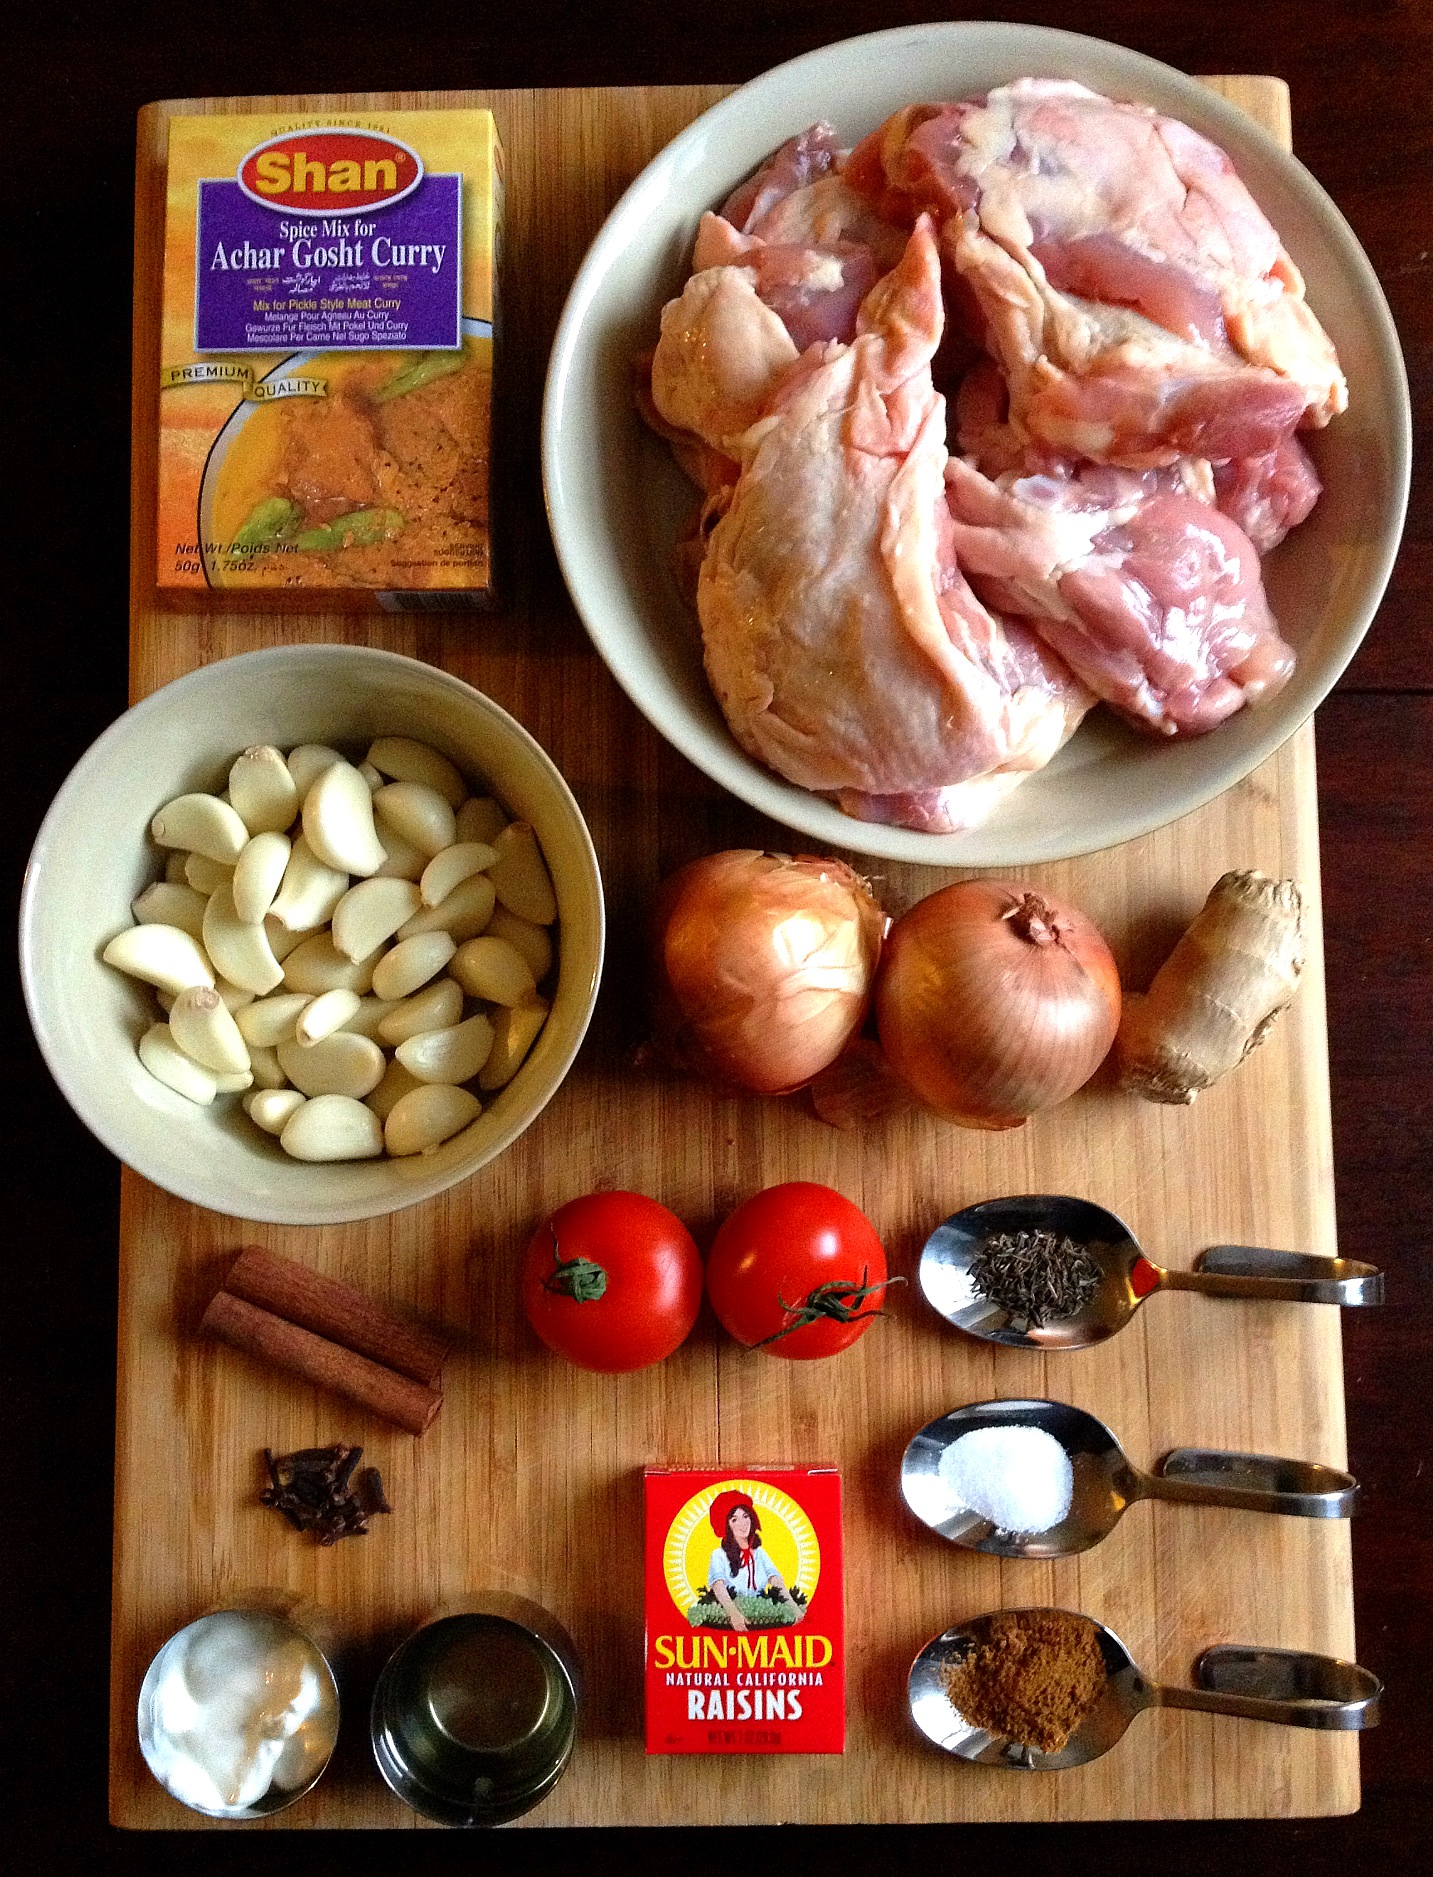 Ingredients for Indian-style Chicken with 40 Garlic Cloves